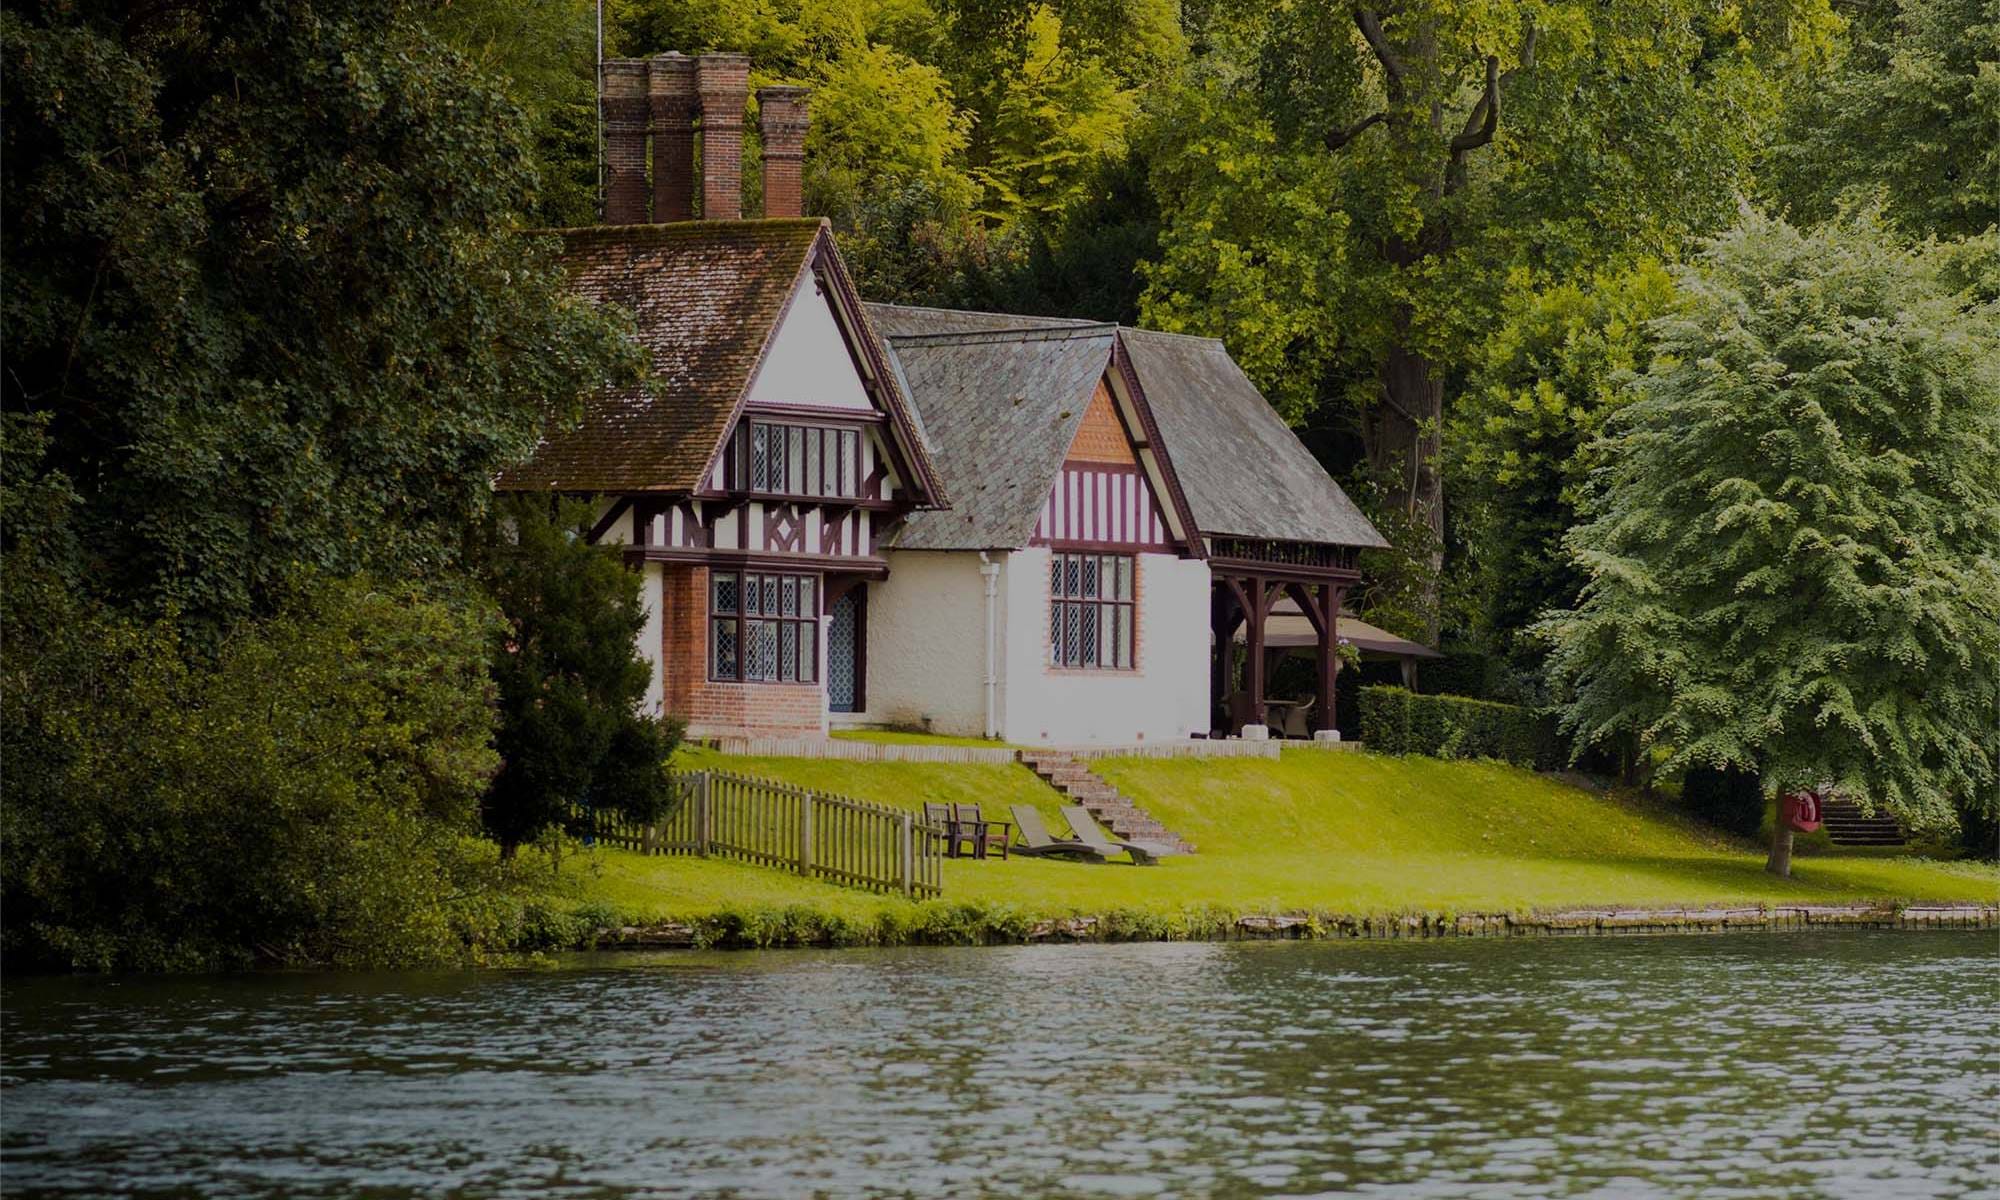 Holiday cottages in berkshire